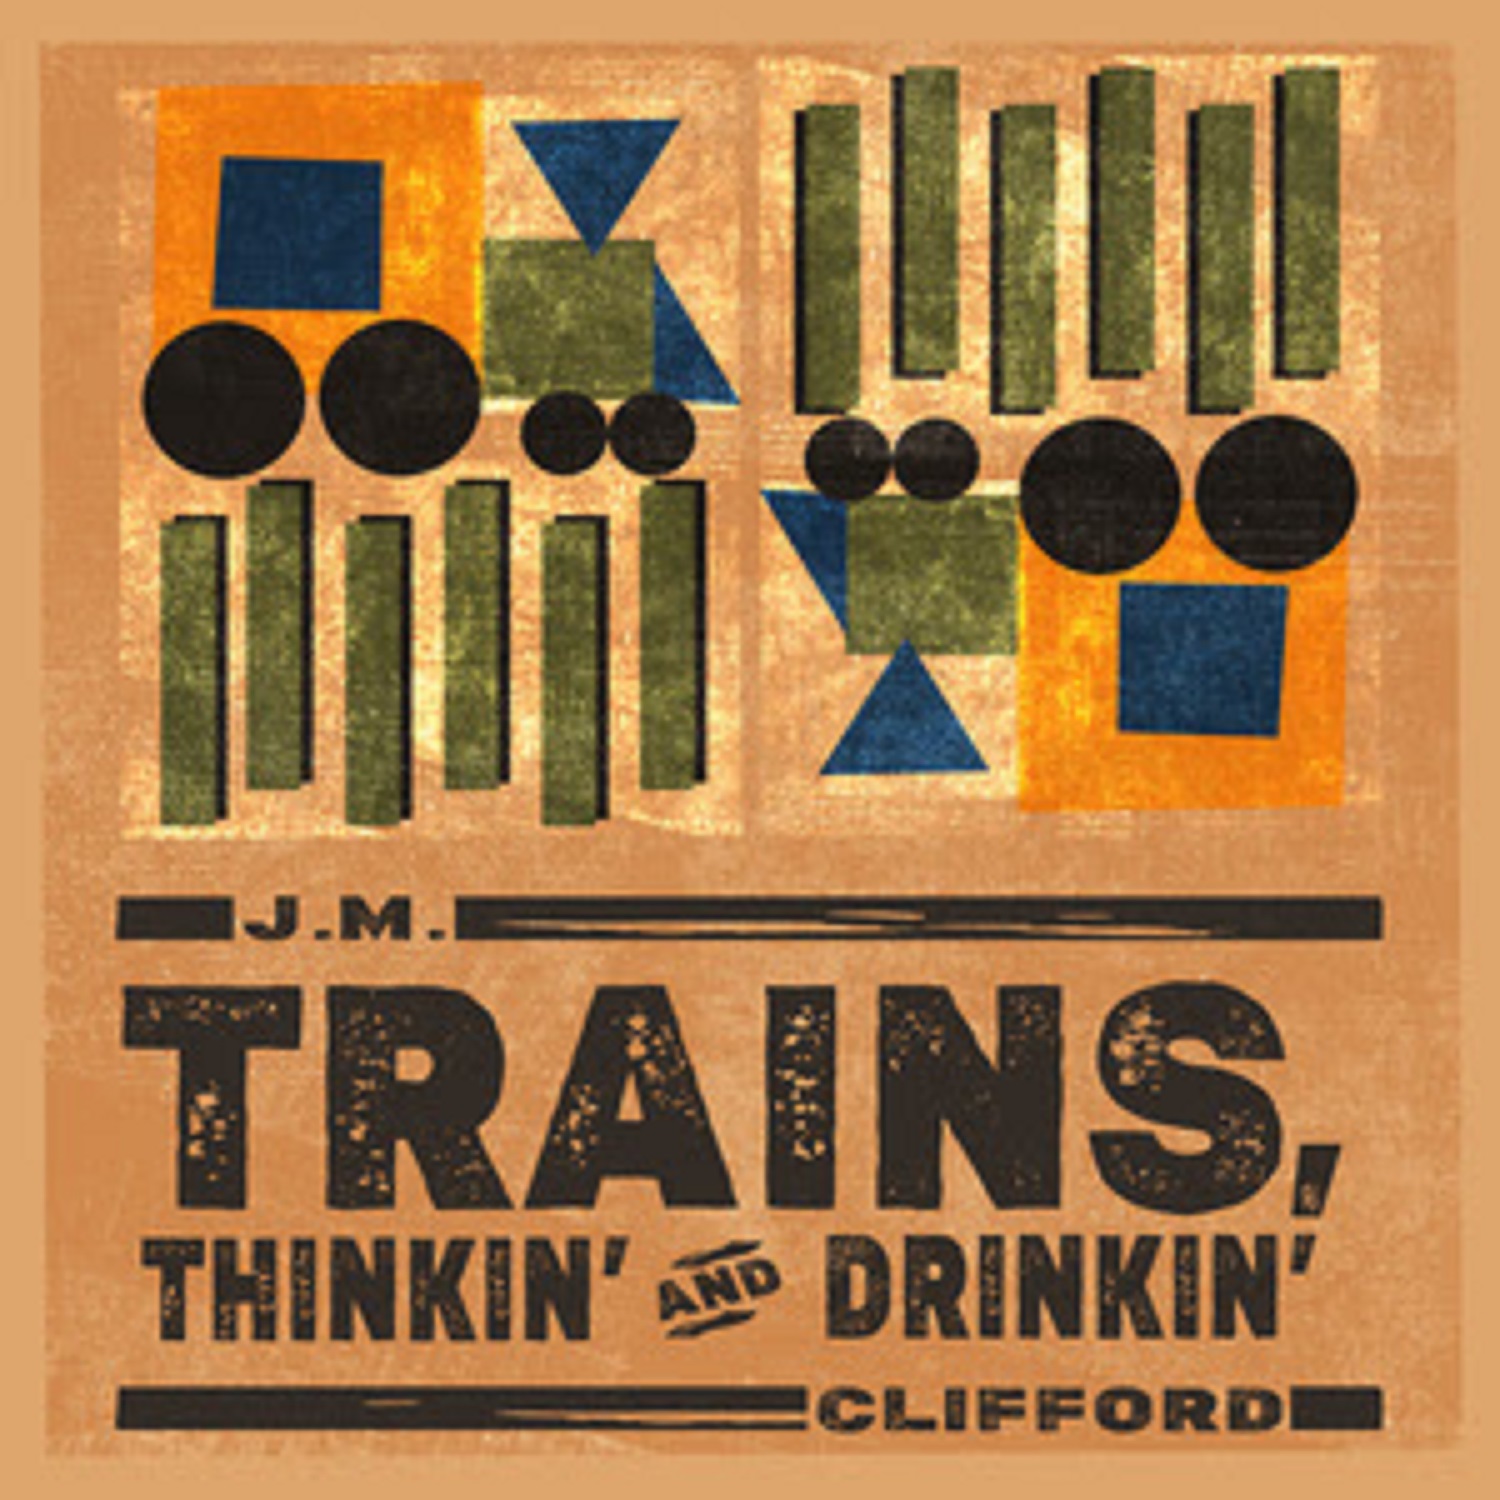 J.M. CLIFFORD ANNOUNCES FORTHCOMING LP "TRAINS, THINKIN' AND DRINKIN'" + TITLE TRACK OUT TODAY